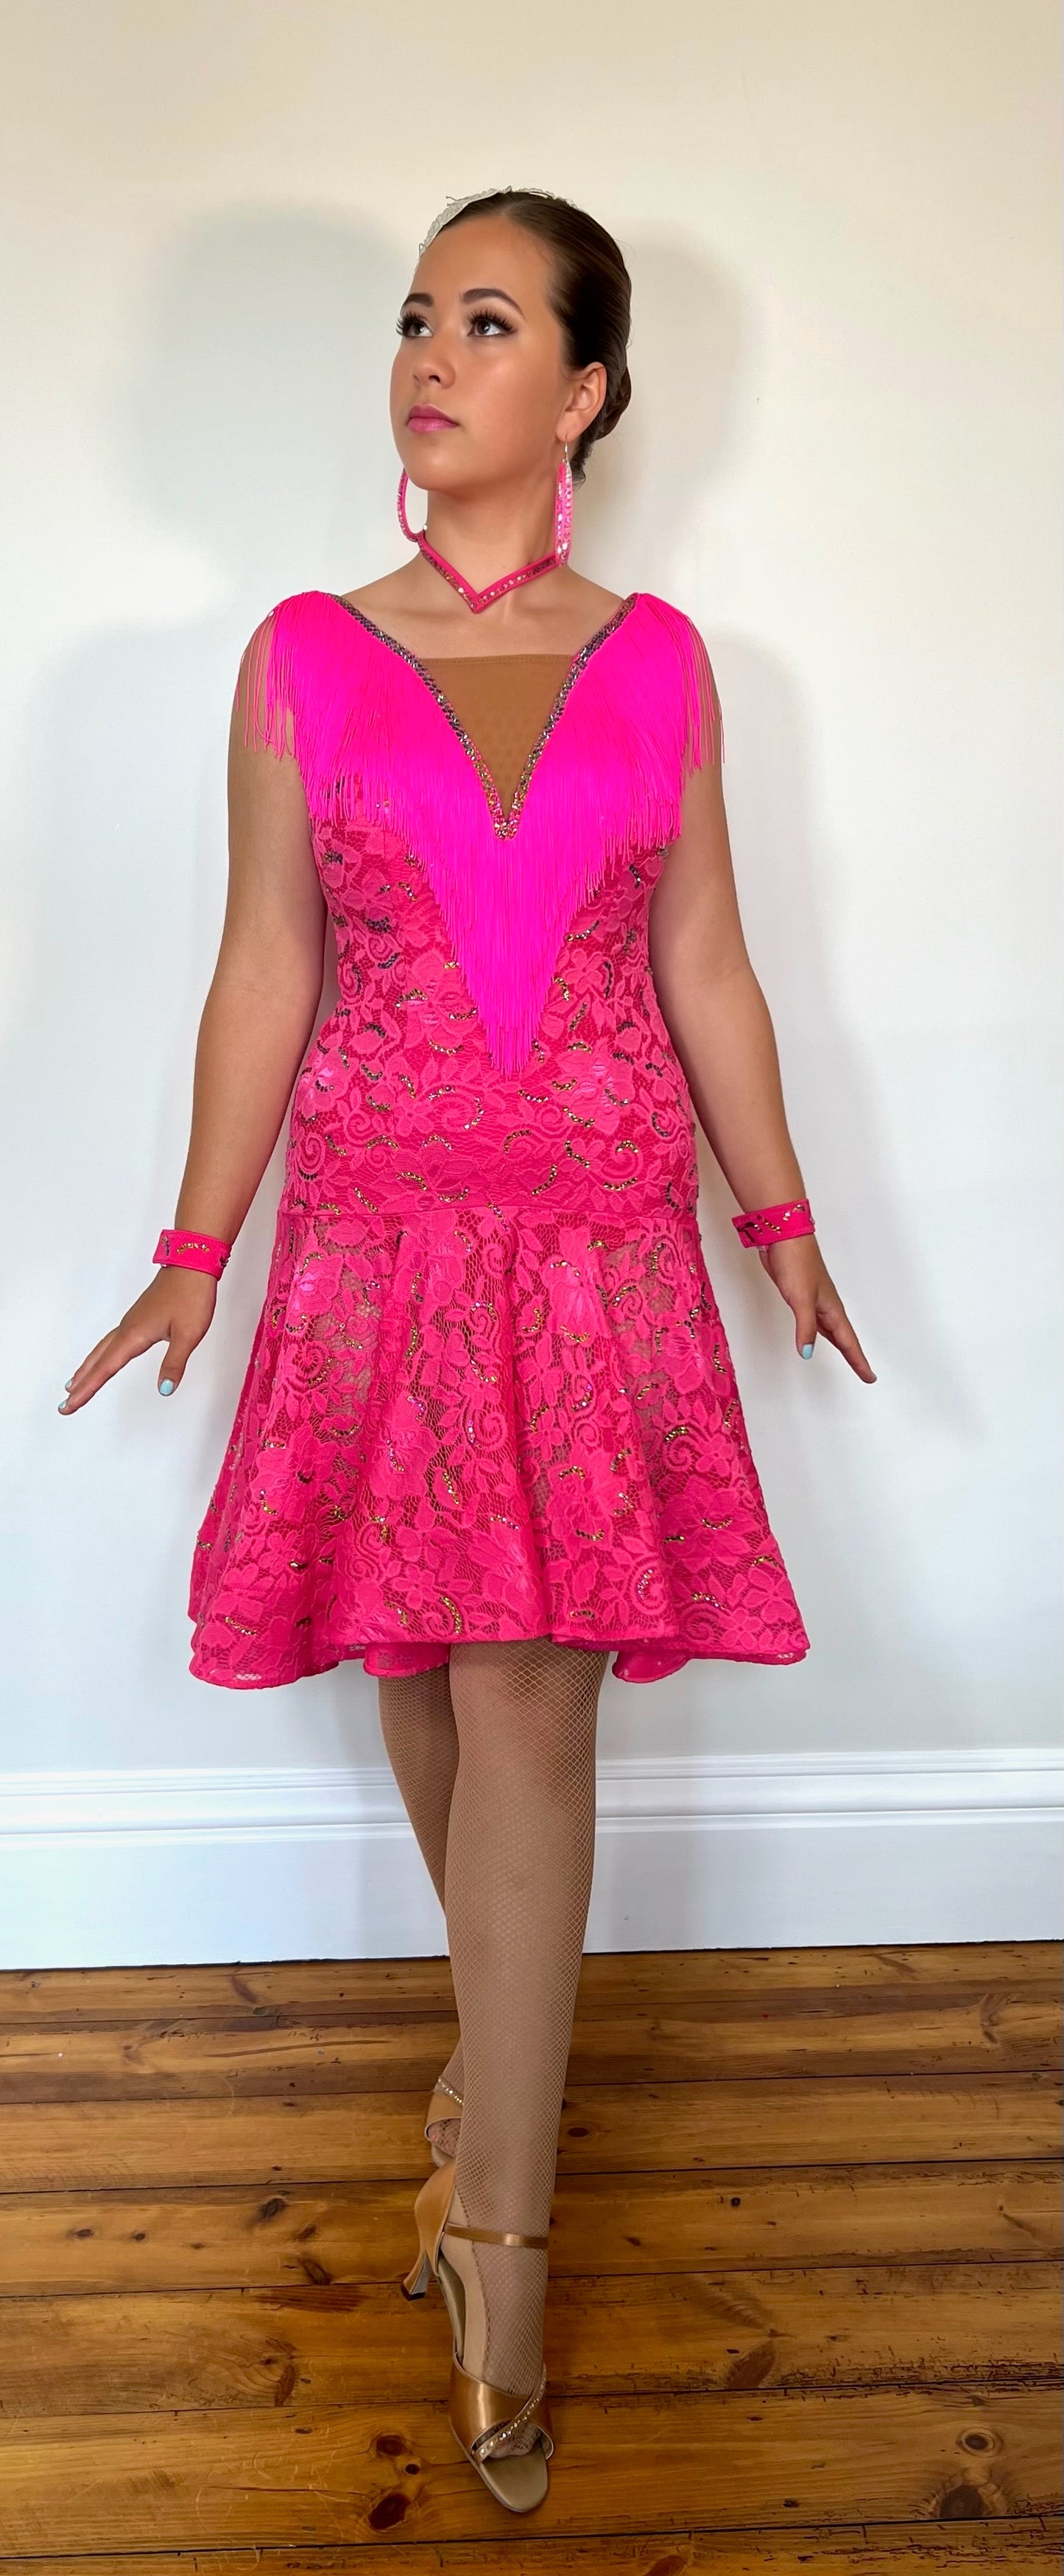 020 Cerise Pink Lace Dress with fringe detail to chest and back.